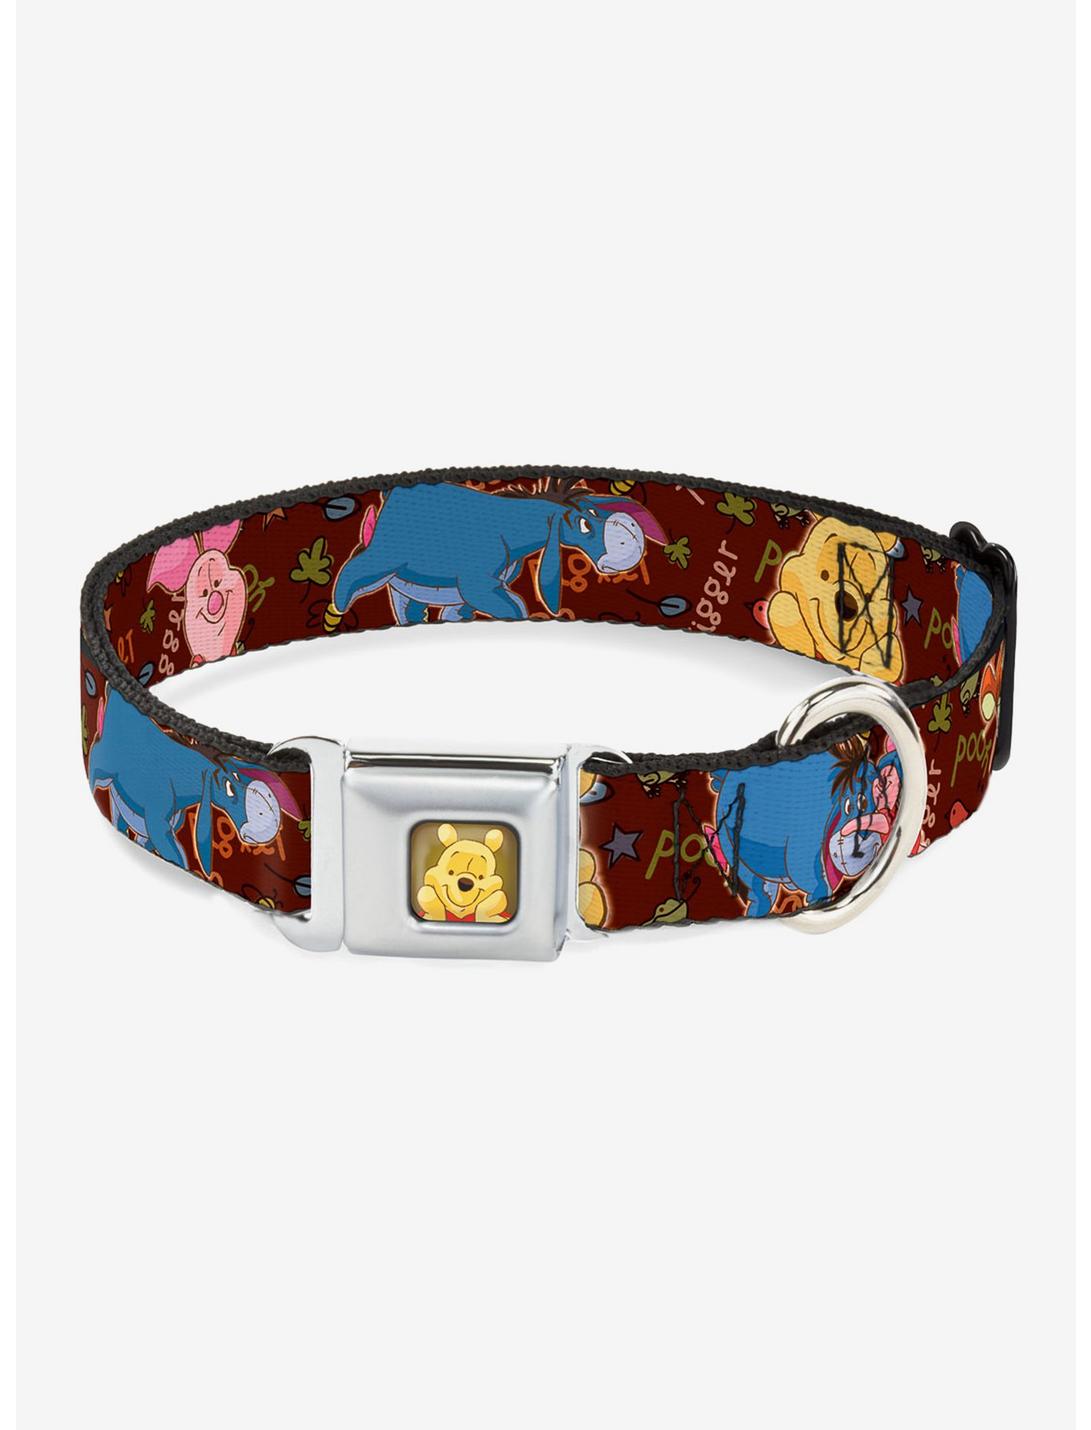 Disney Winnie The Pooh Character Poses Dog Collar Seatbelt Buckle, MULTI COLOR, hi-res